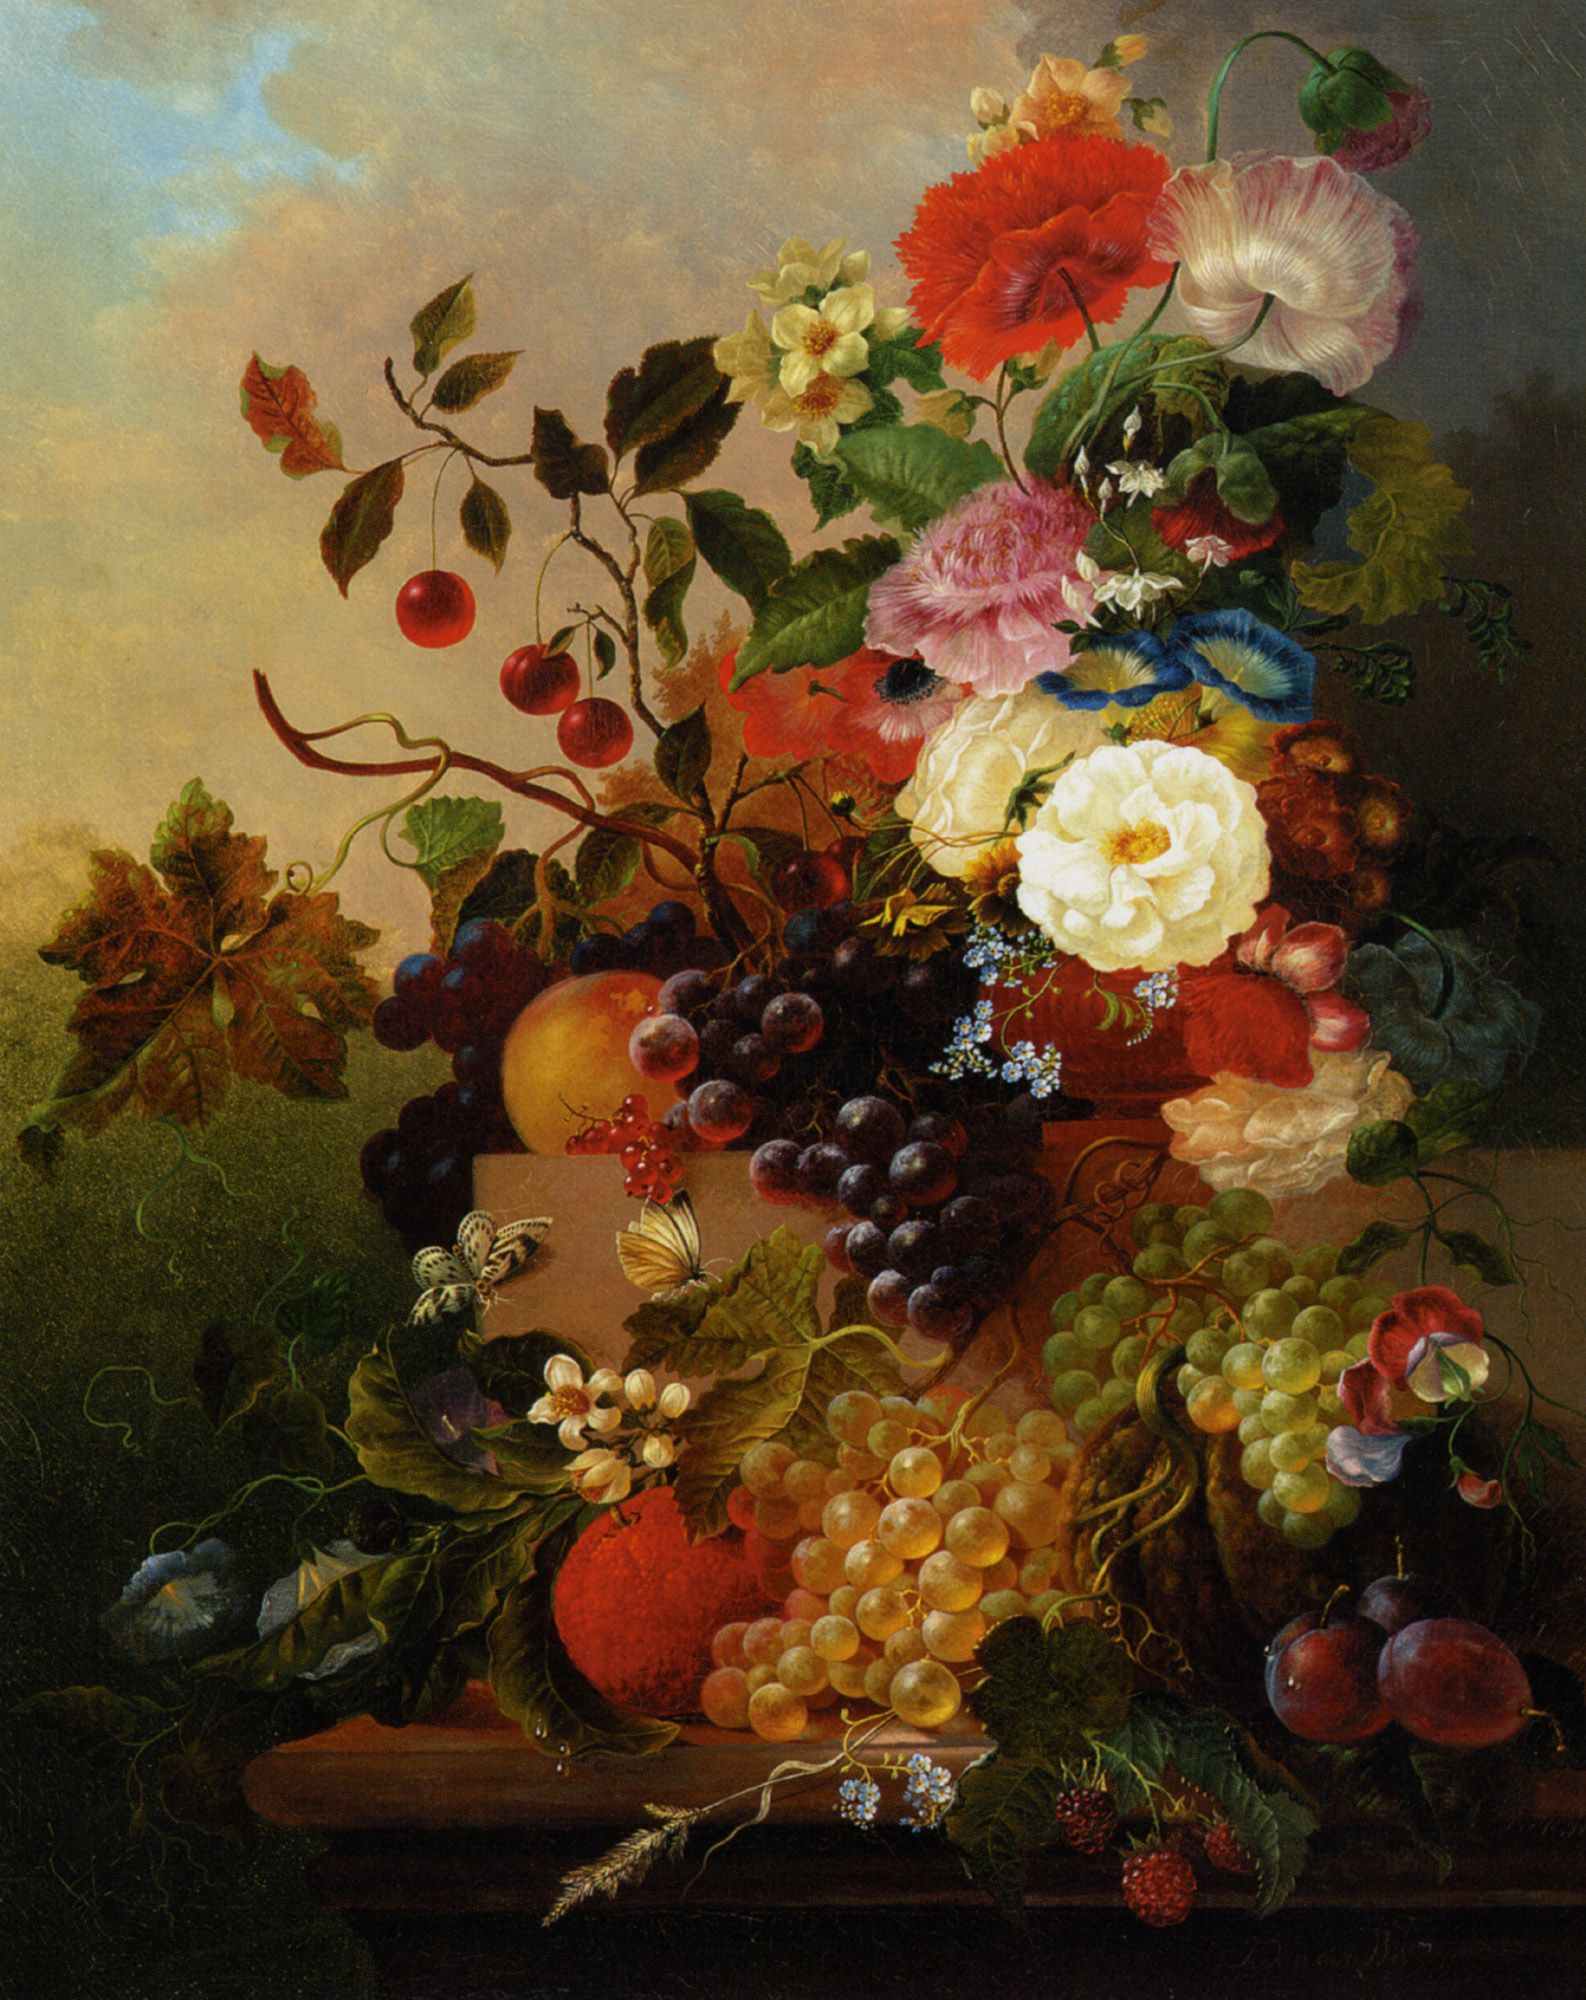 Poppies Peonies Roses and other Flowers with Grapes on a Marble Ledge by Jan Van Der Waarden